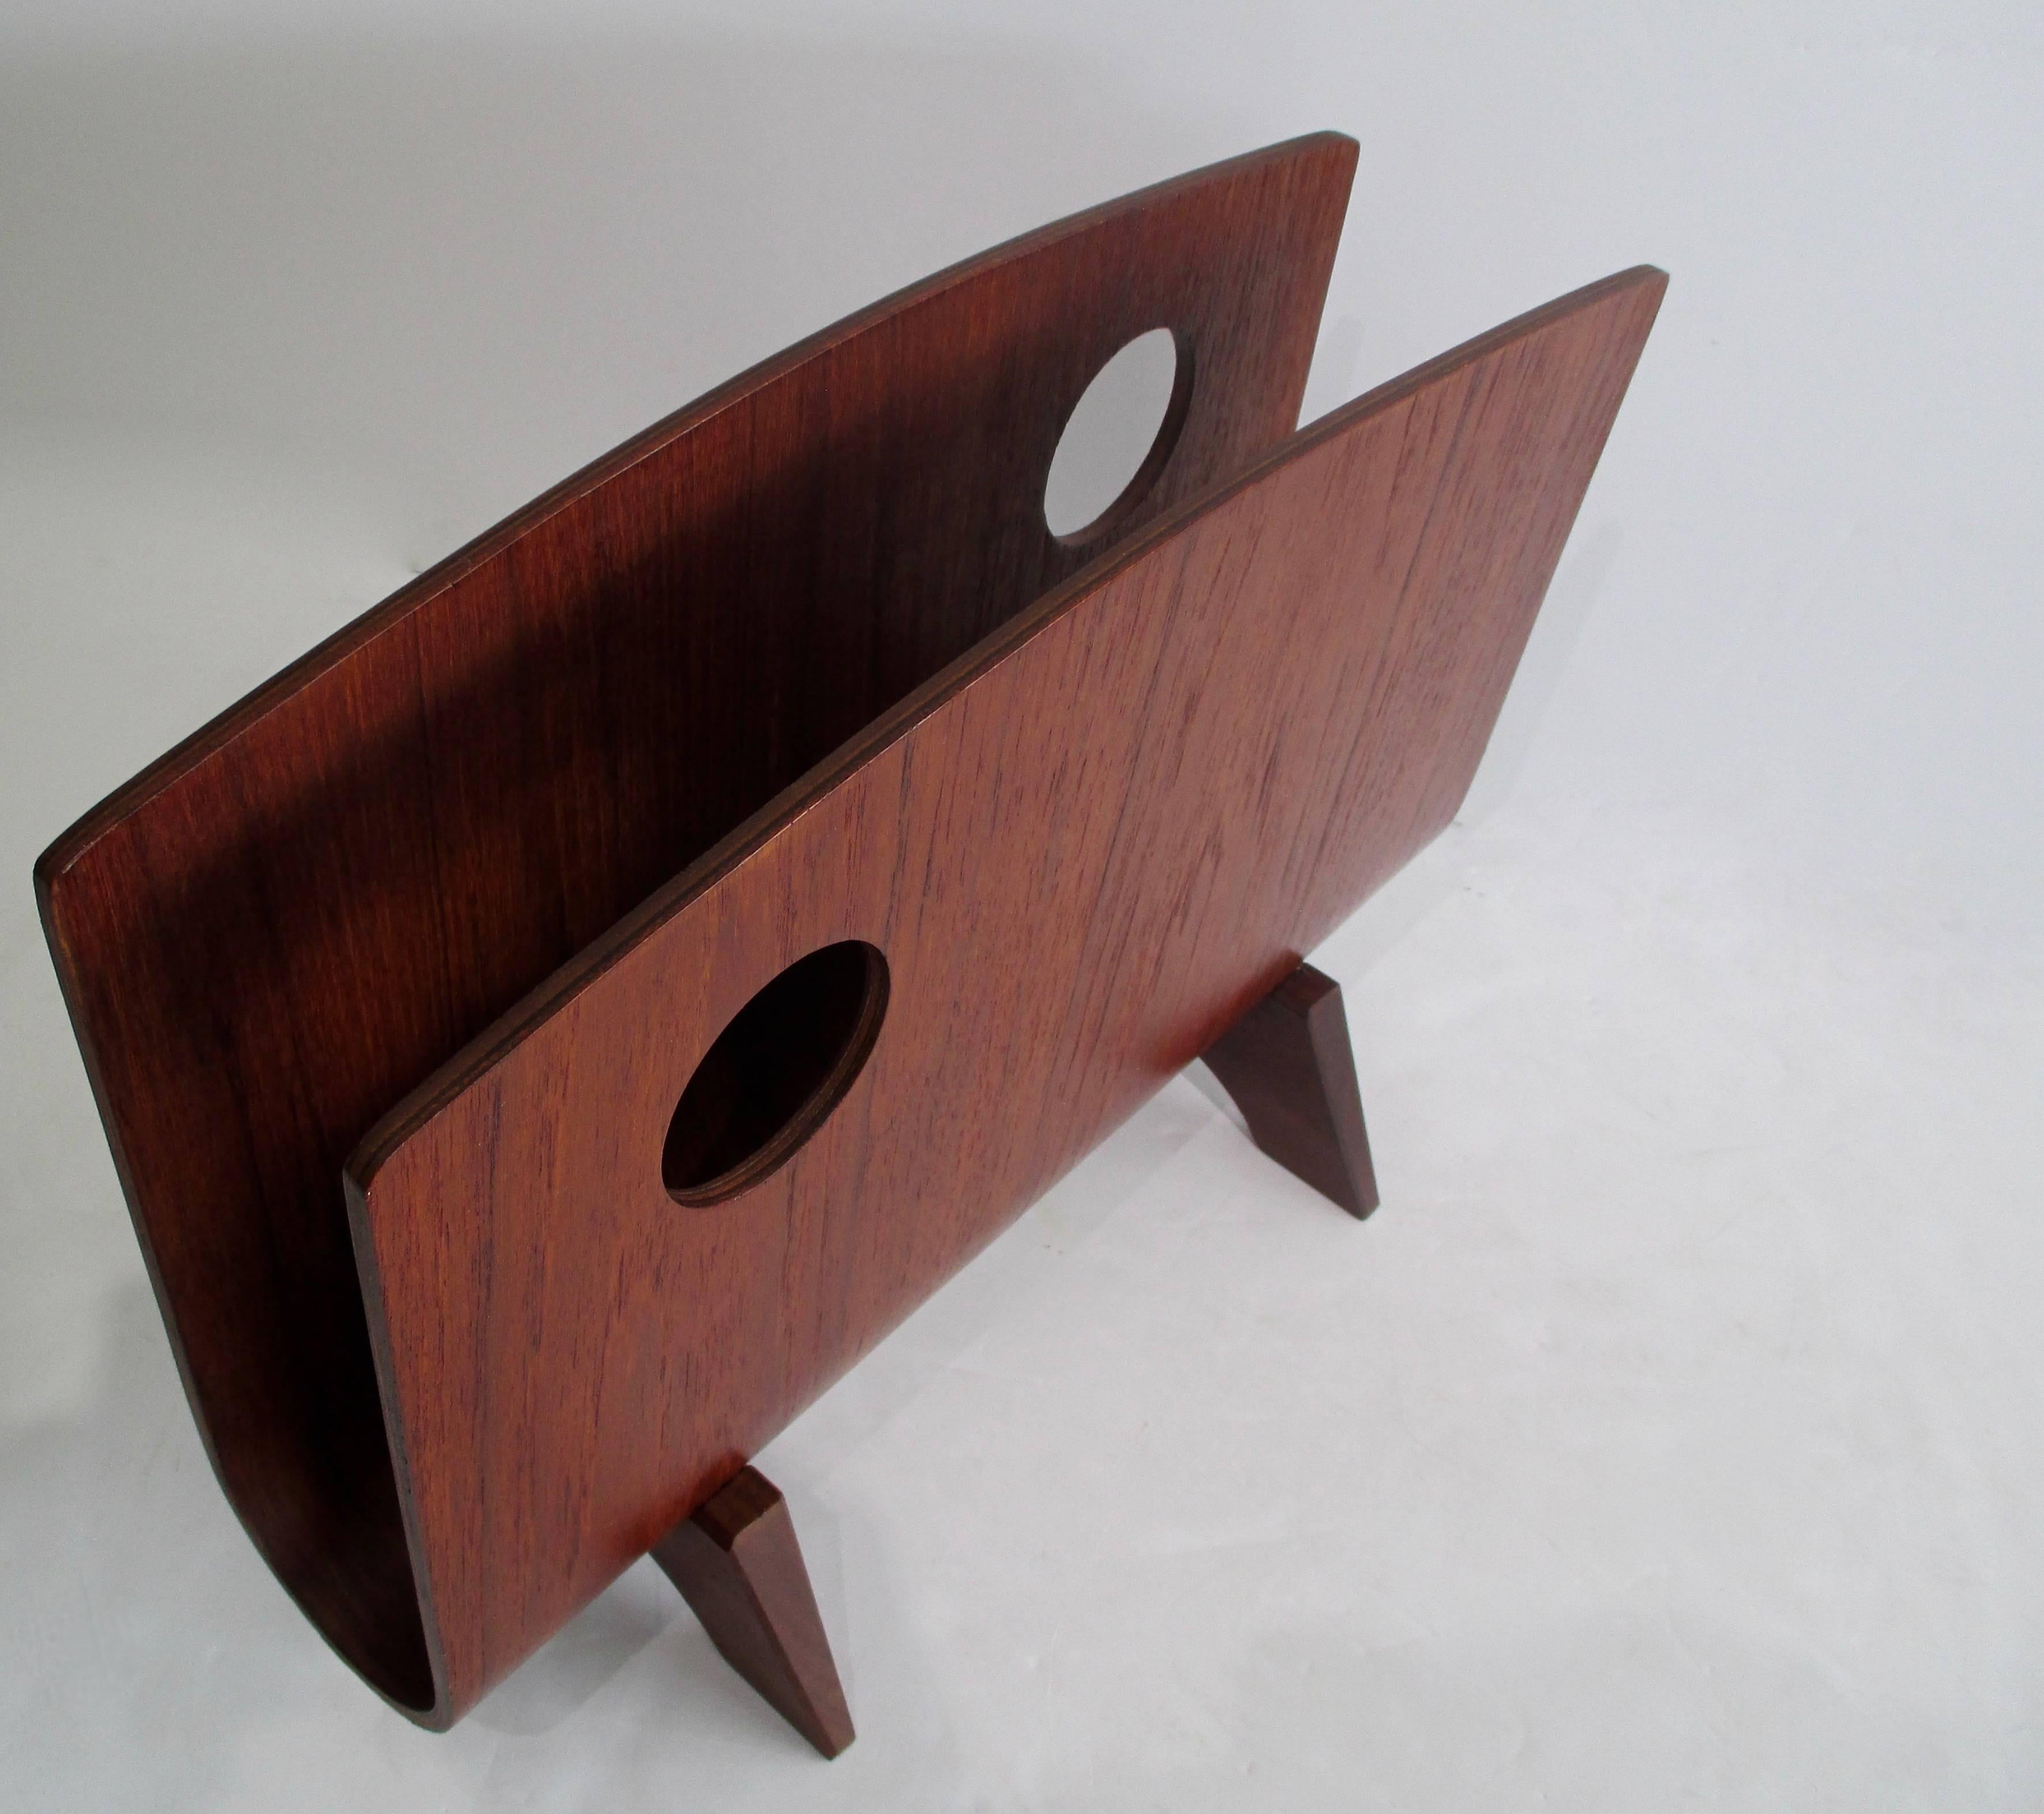 Magazine rack by Walter Dippen.